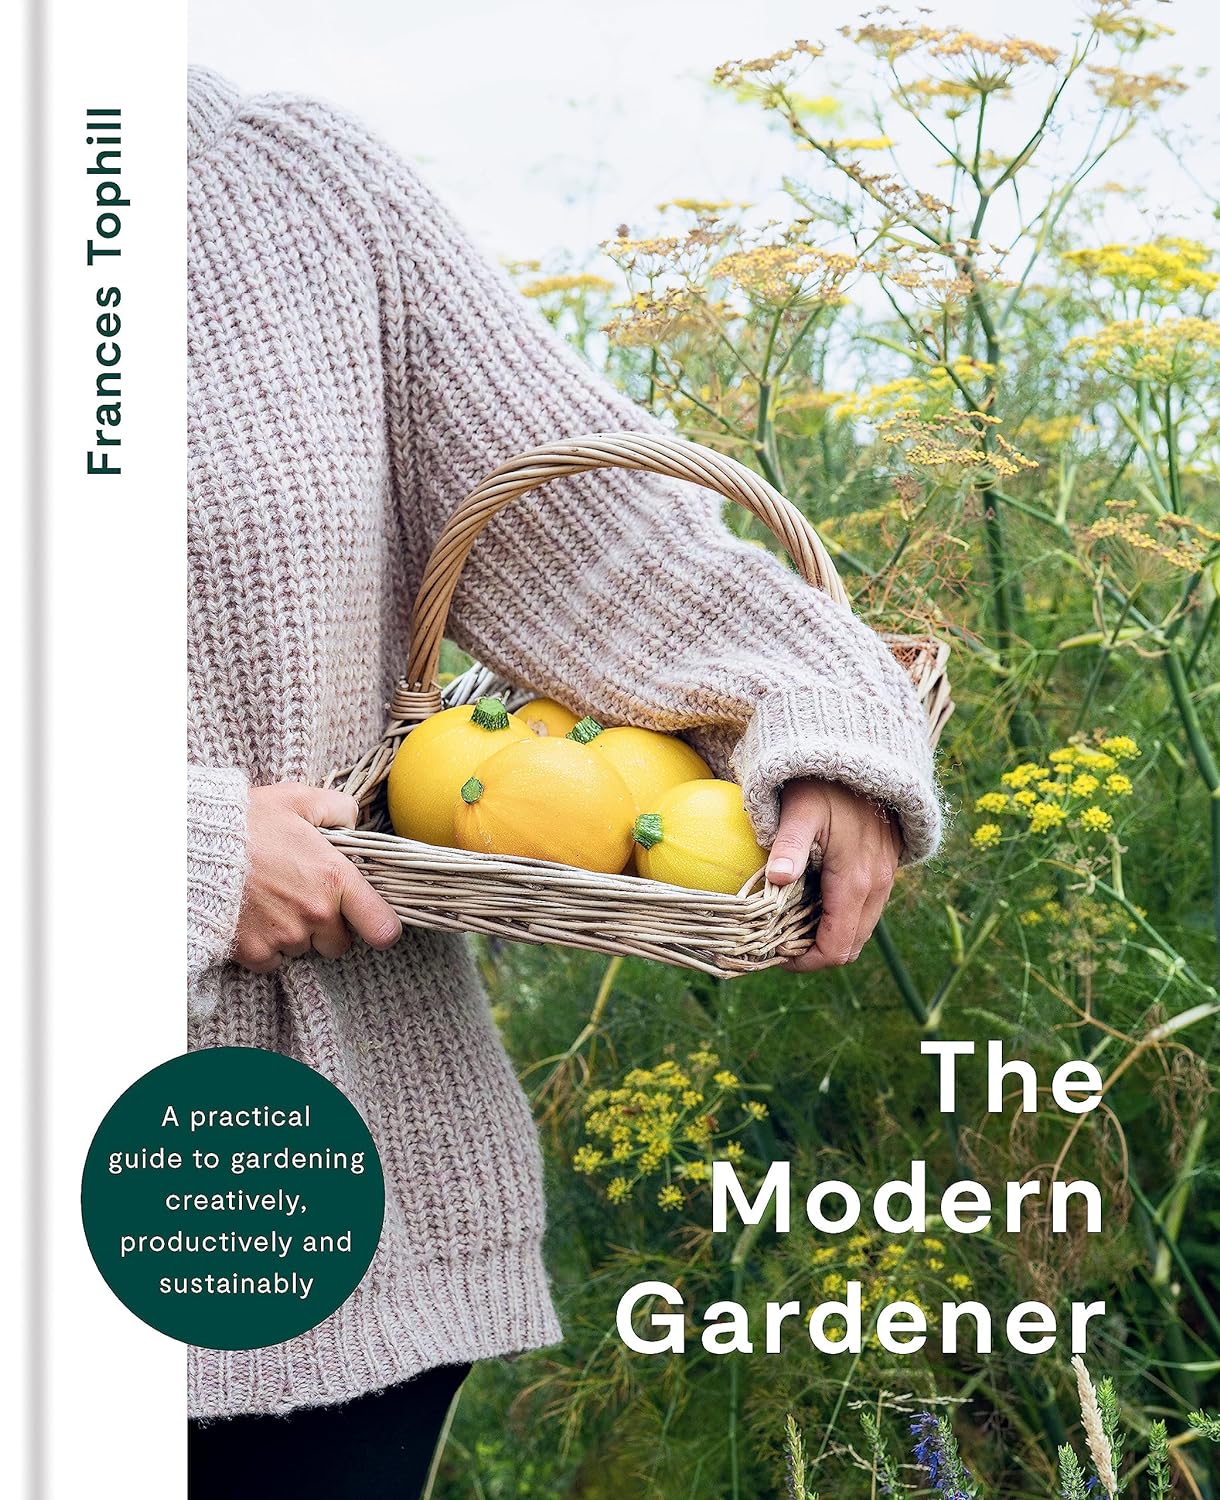 The Modern Gardener: A practical guide to gardening creatively, productively and sustainably 